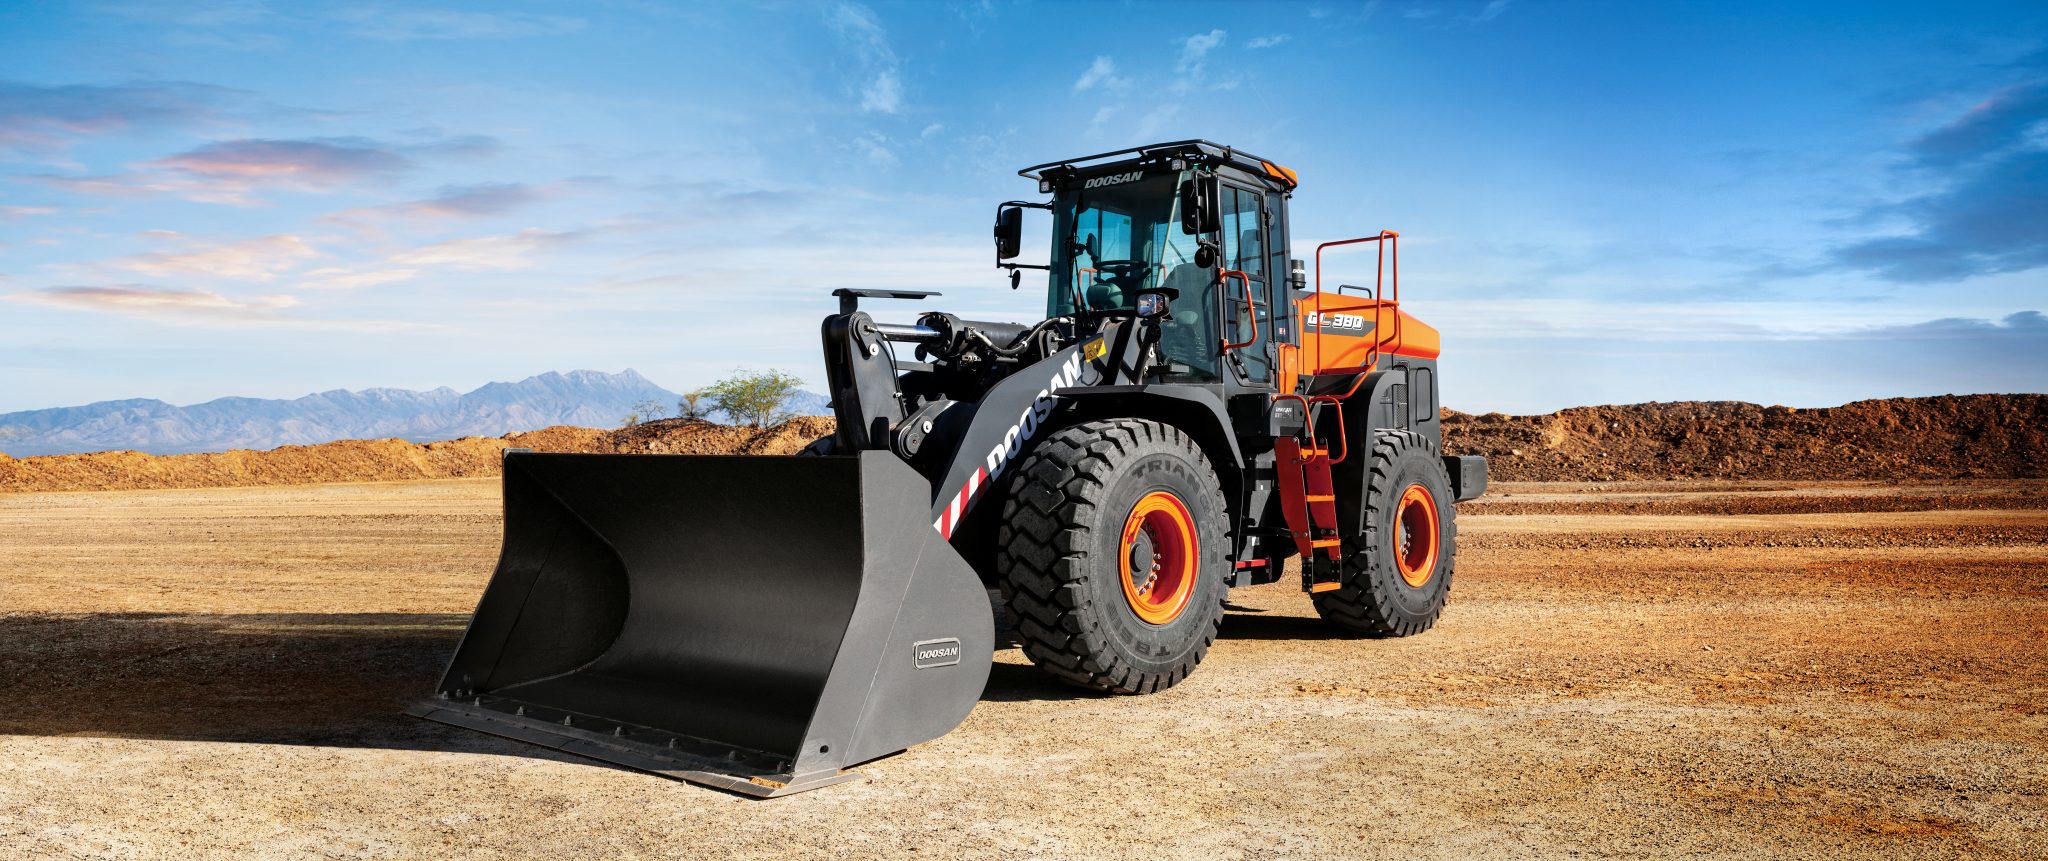 Doosan Infracores New Wheel Loader Model To Lift Greater Loads Rock To Roadrock To Road 0403